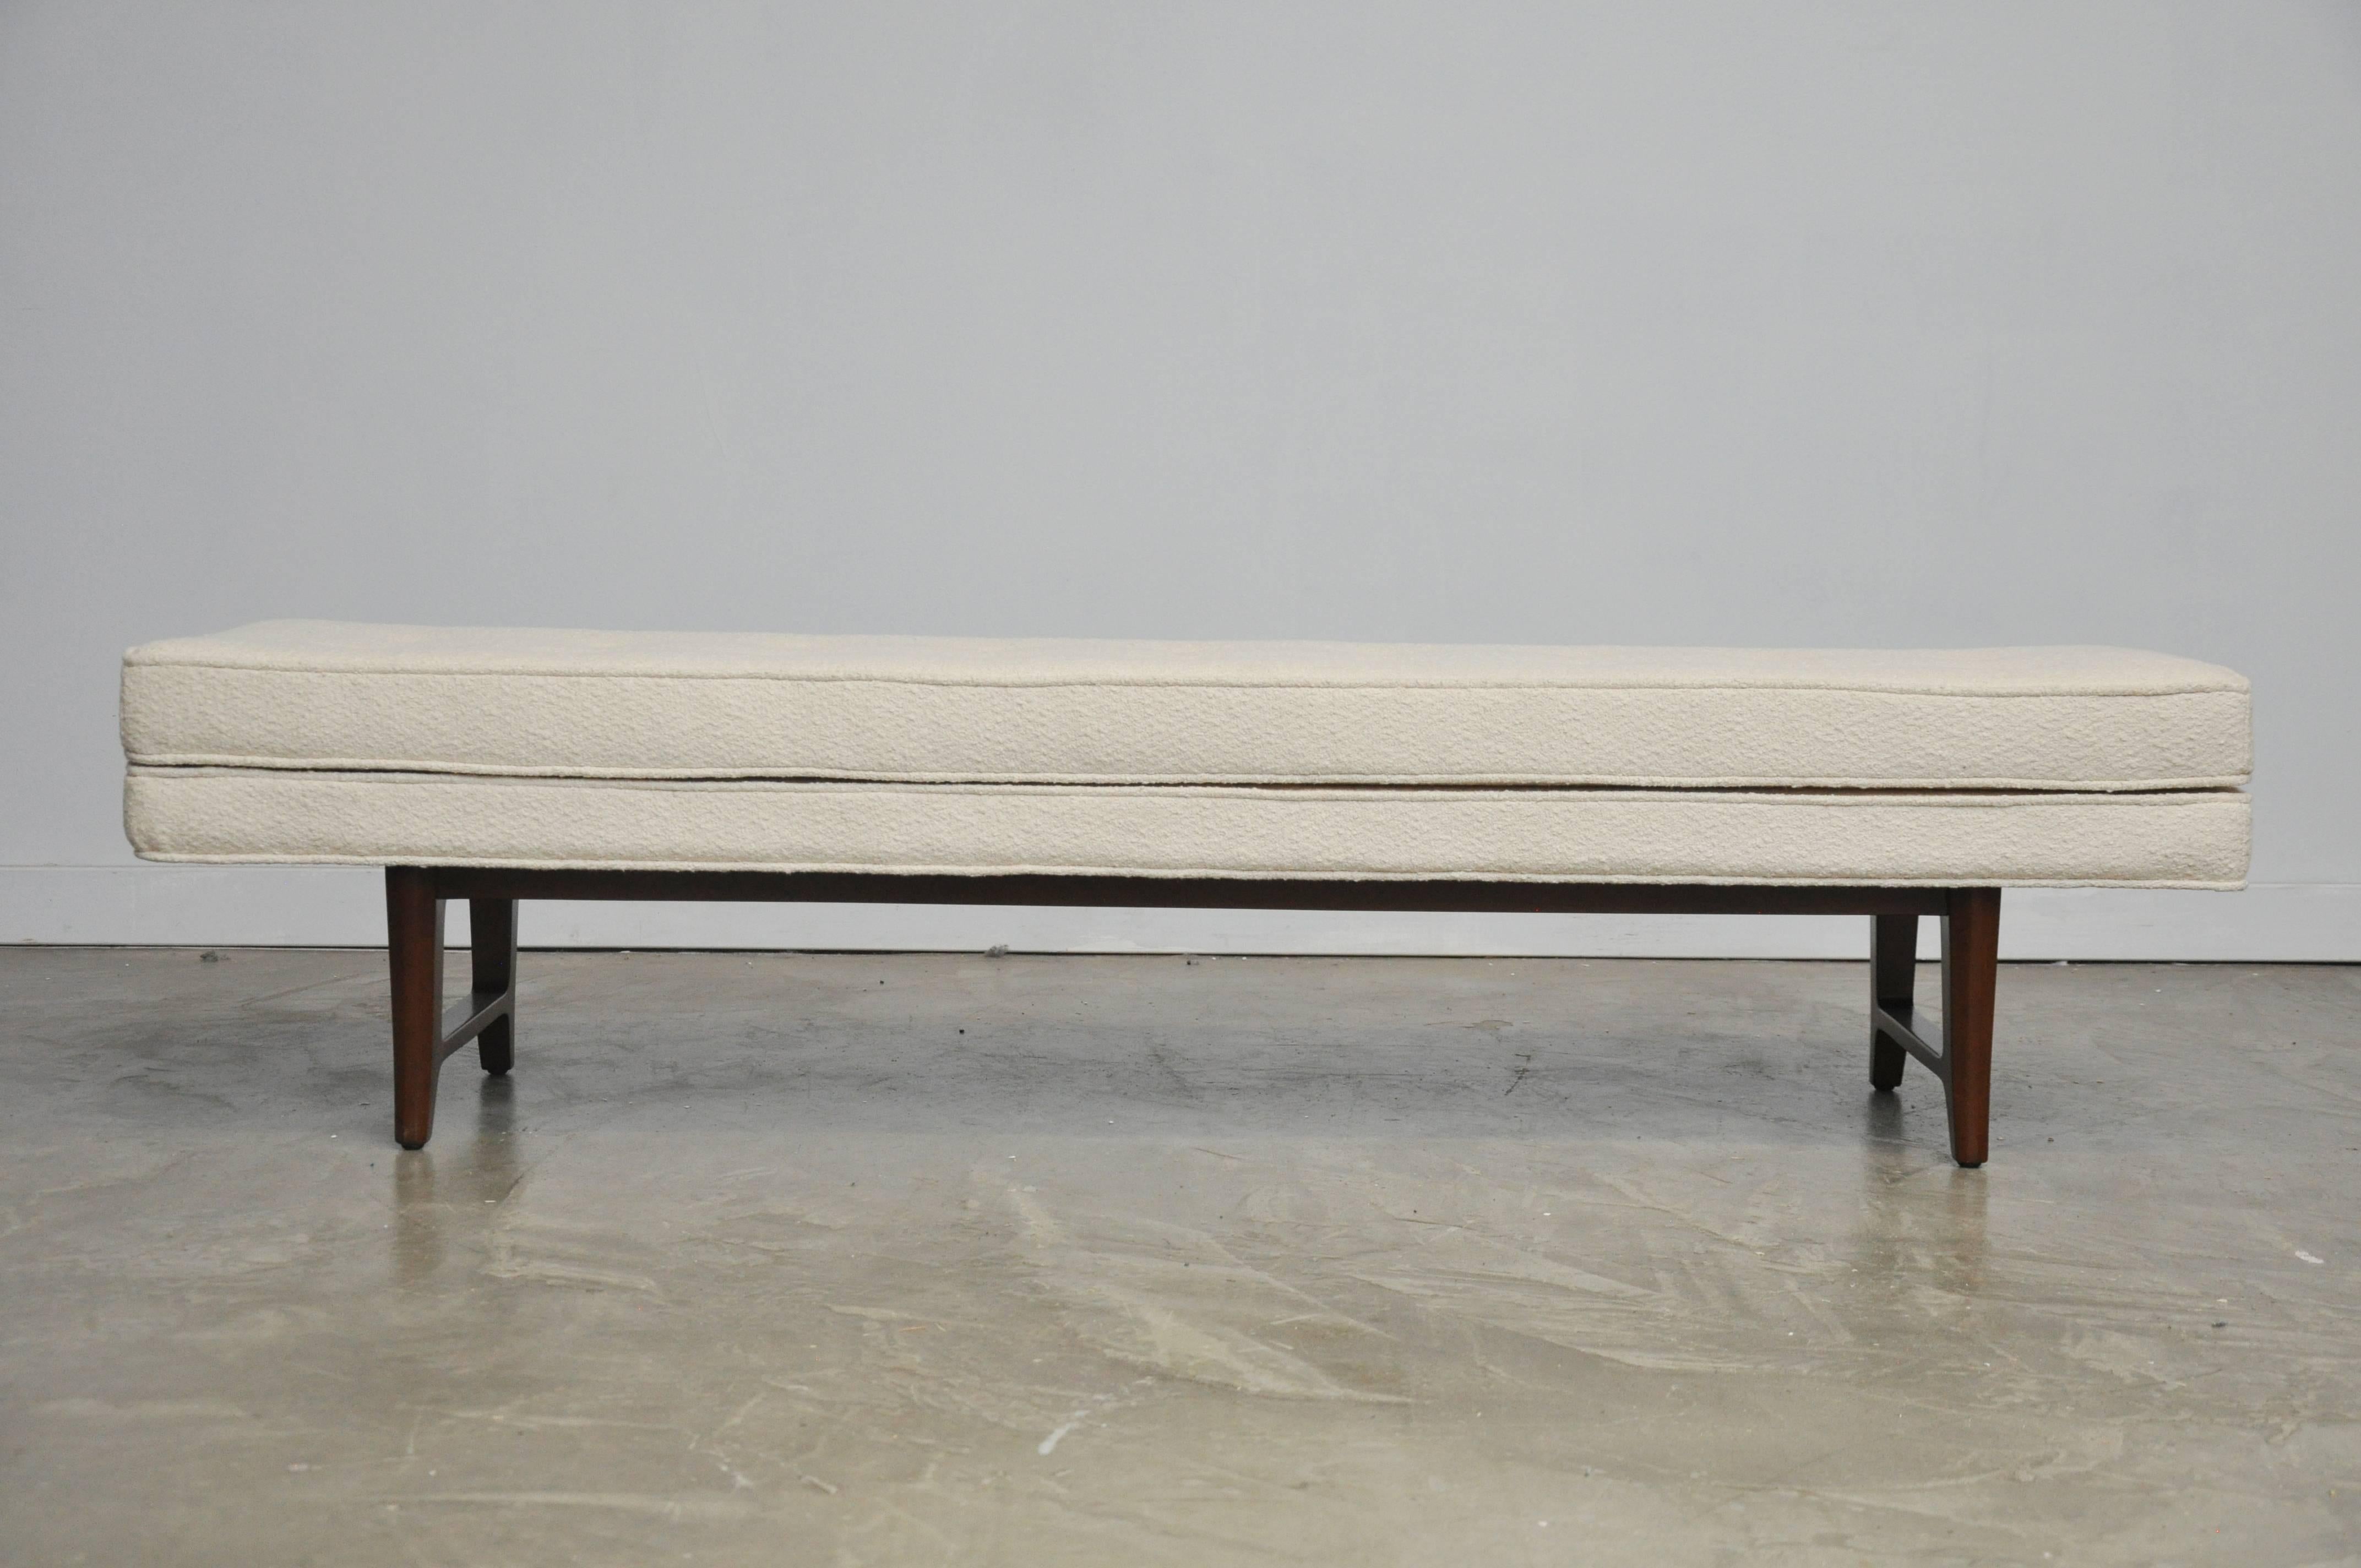 Rare form bench from the 